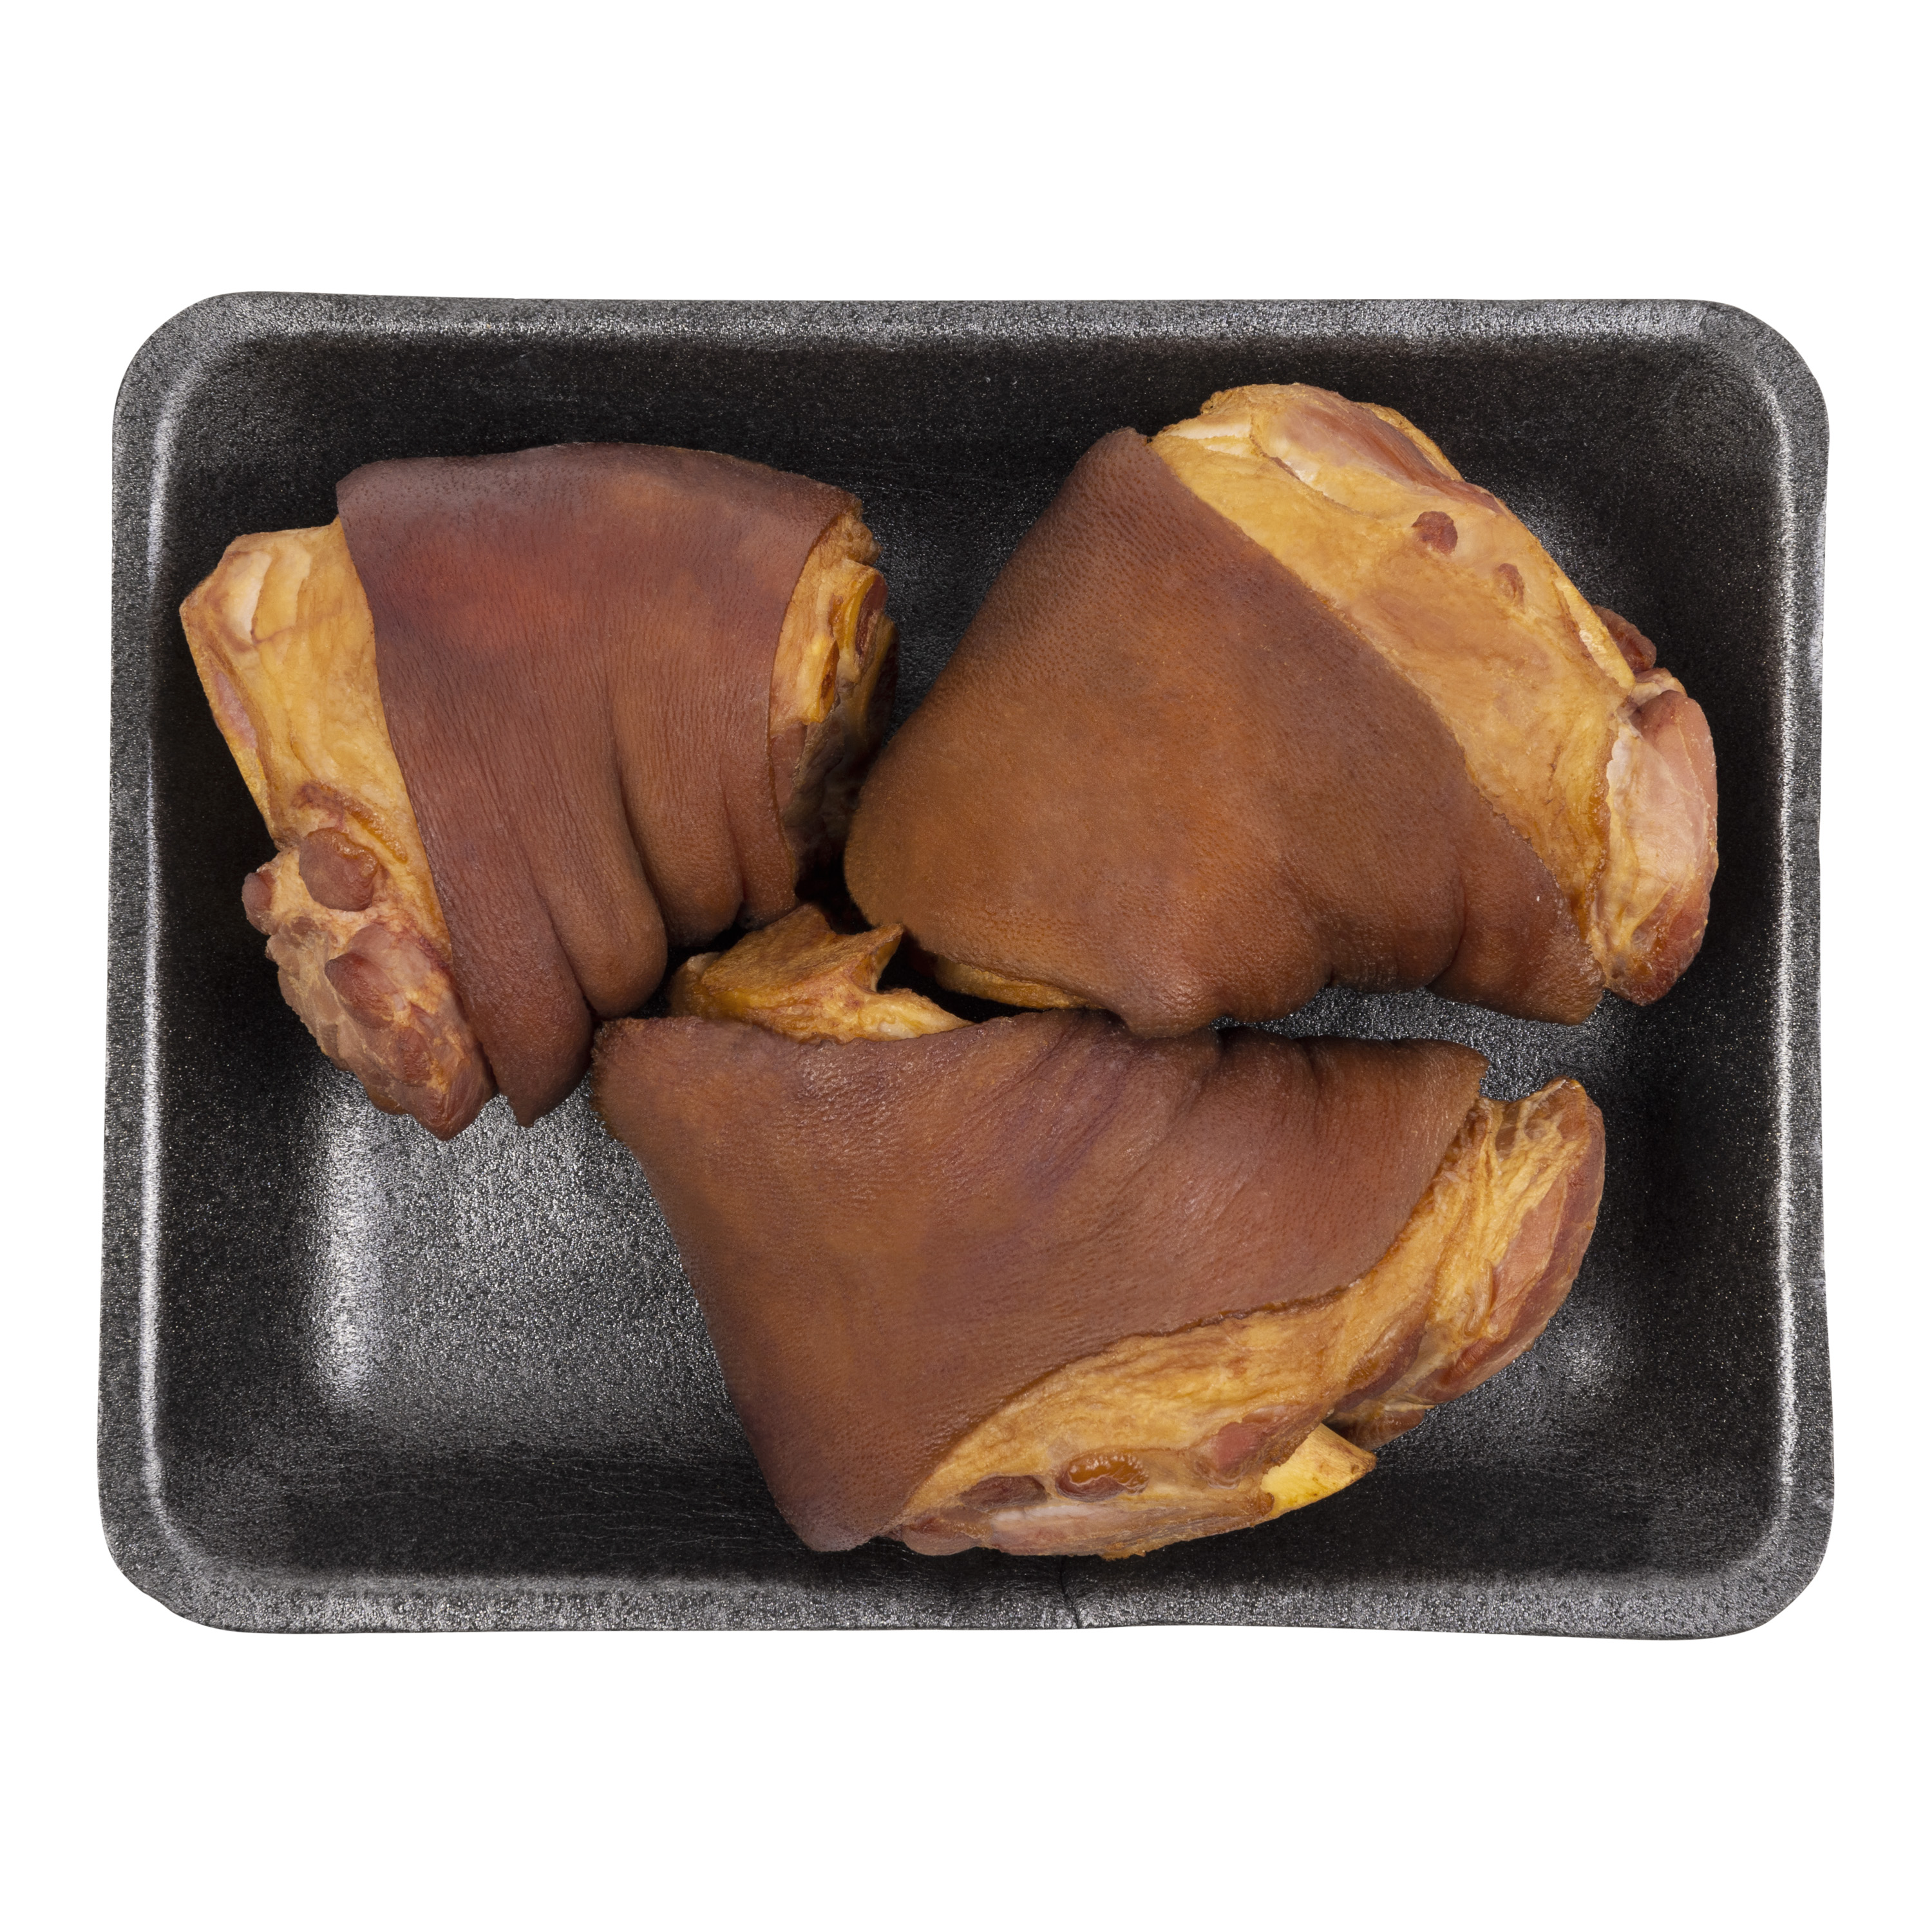 A & R Packing Co Inc. Tray, Smoked, Smoked Pork Hocks, 1.7-2.75lbs Serving Size 3oz, Protein Per Serving 14g - image 1 of 9